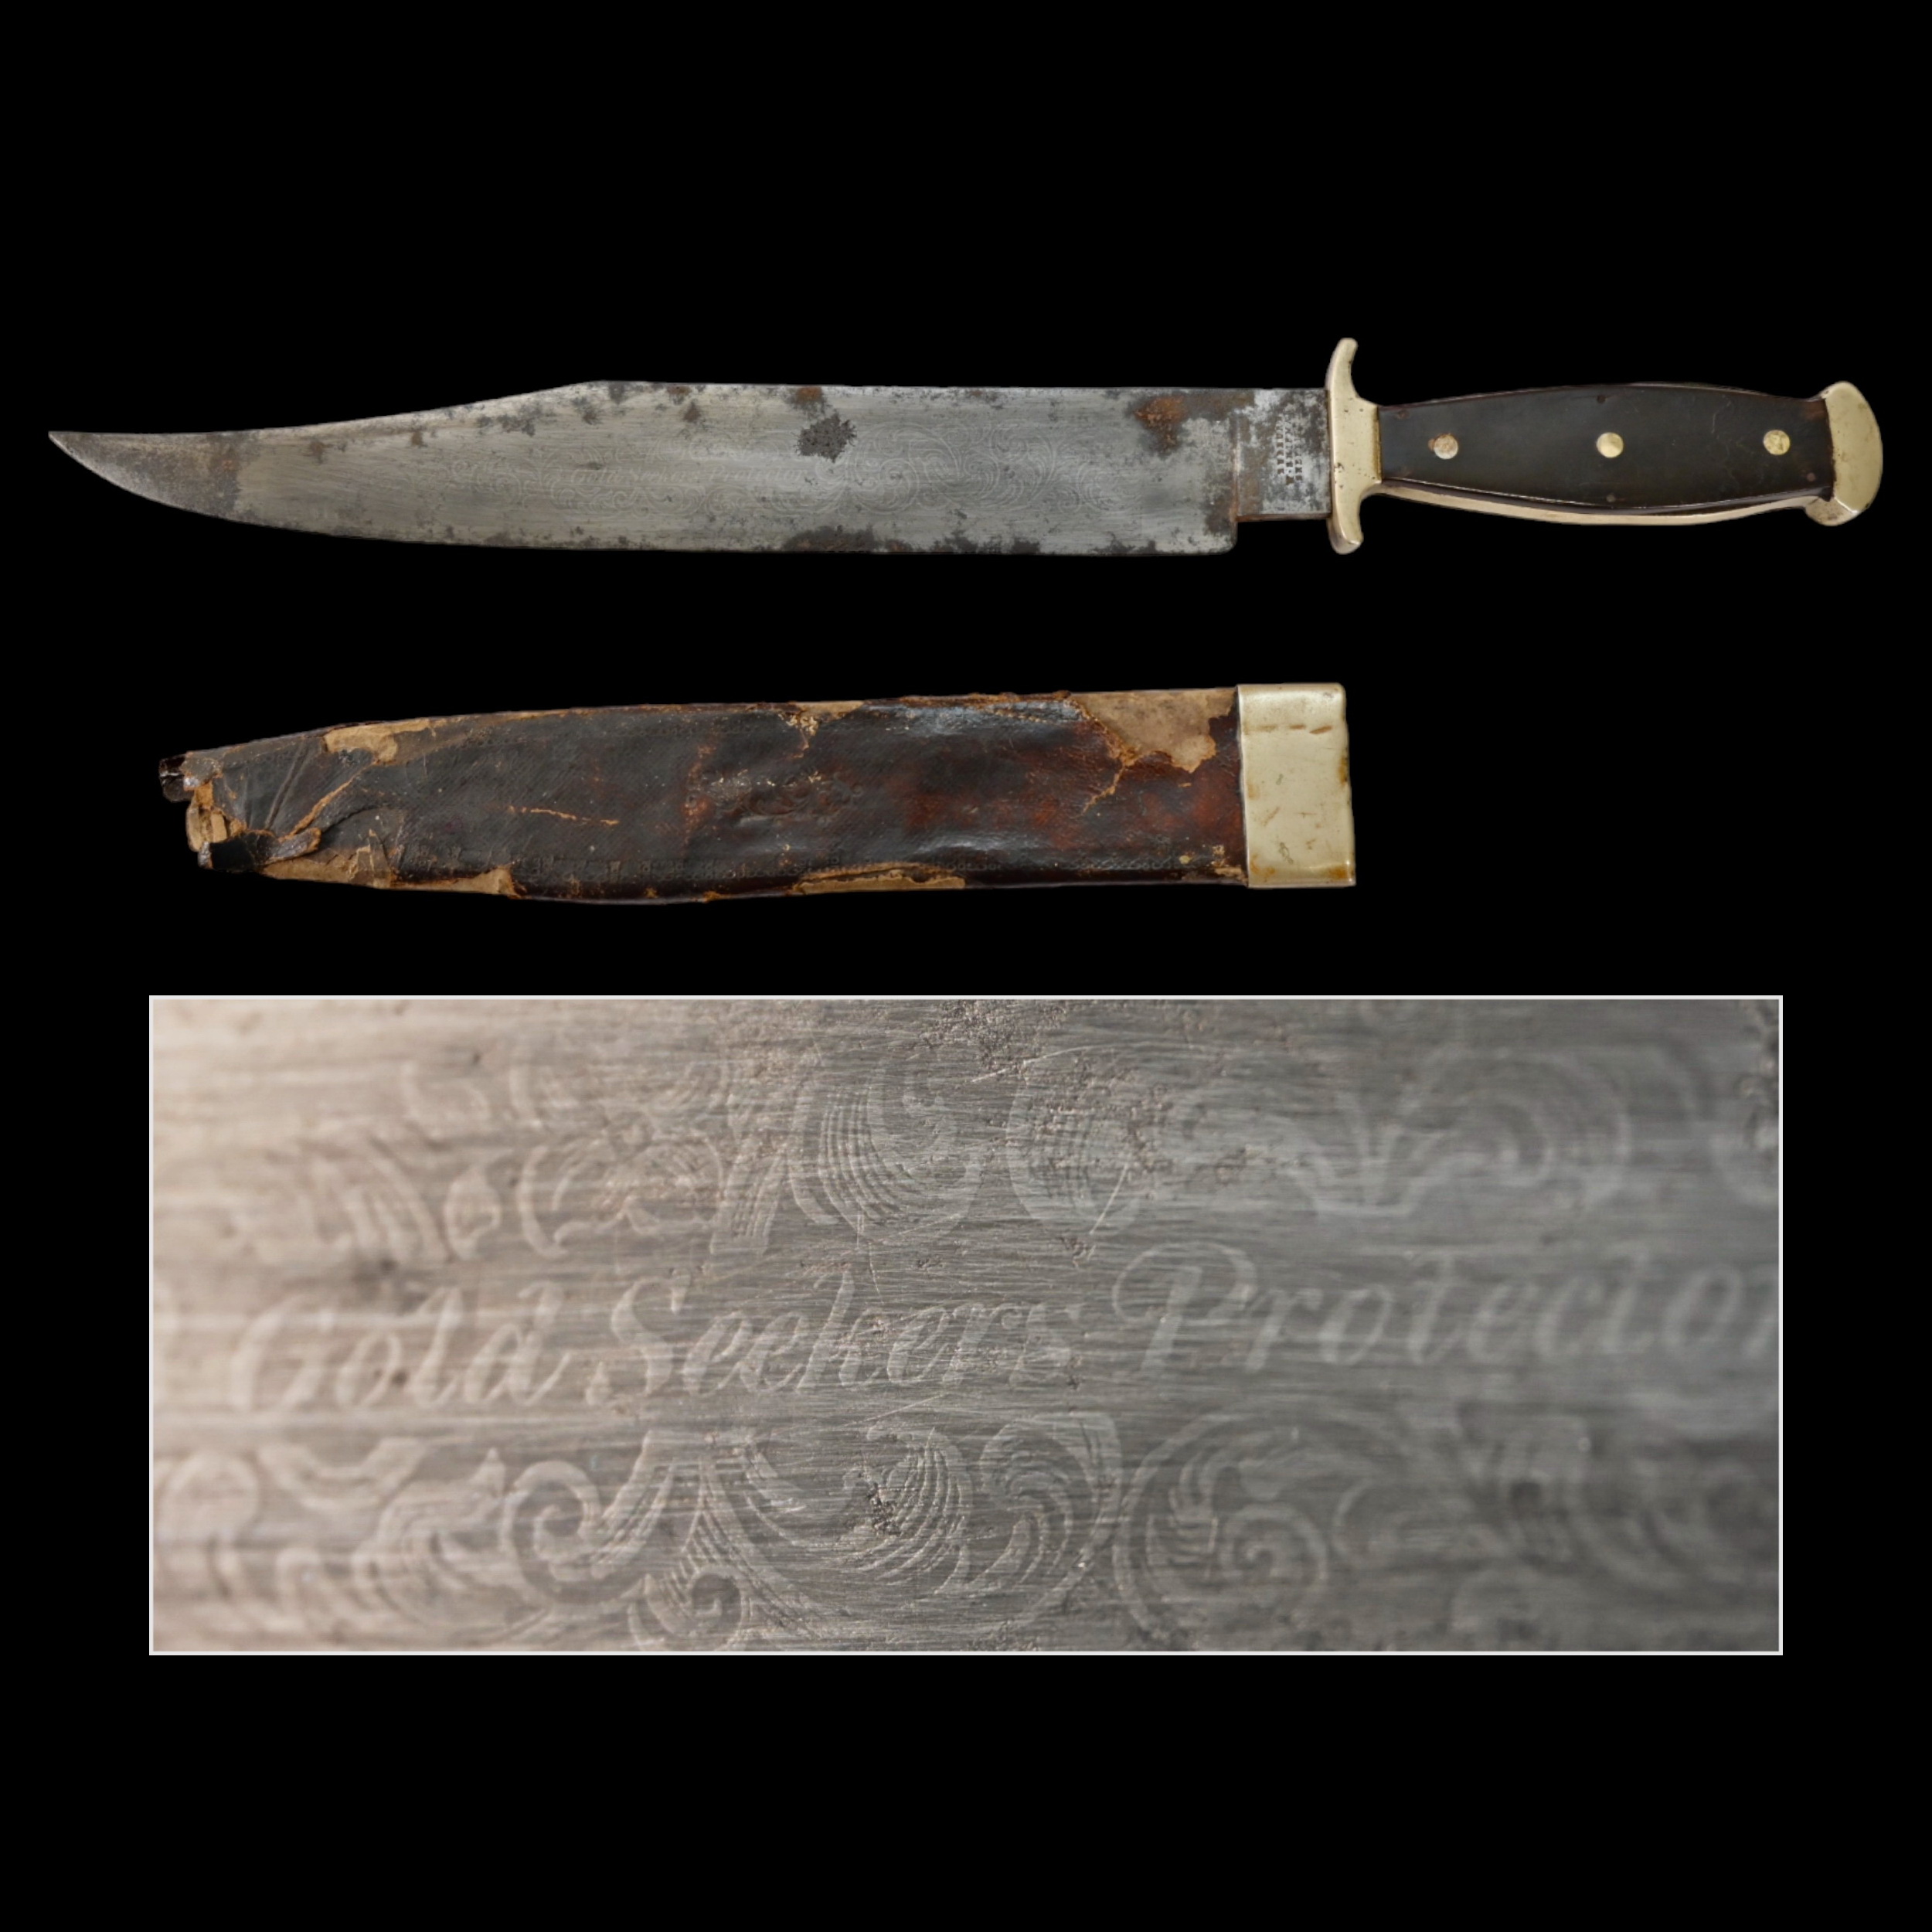 Extra rare and very early Bowie knife of American Gold Miners "Gold Seekers Protector", 1820-30s.